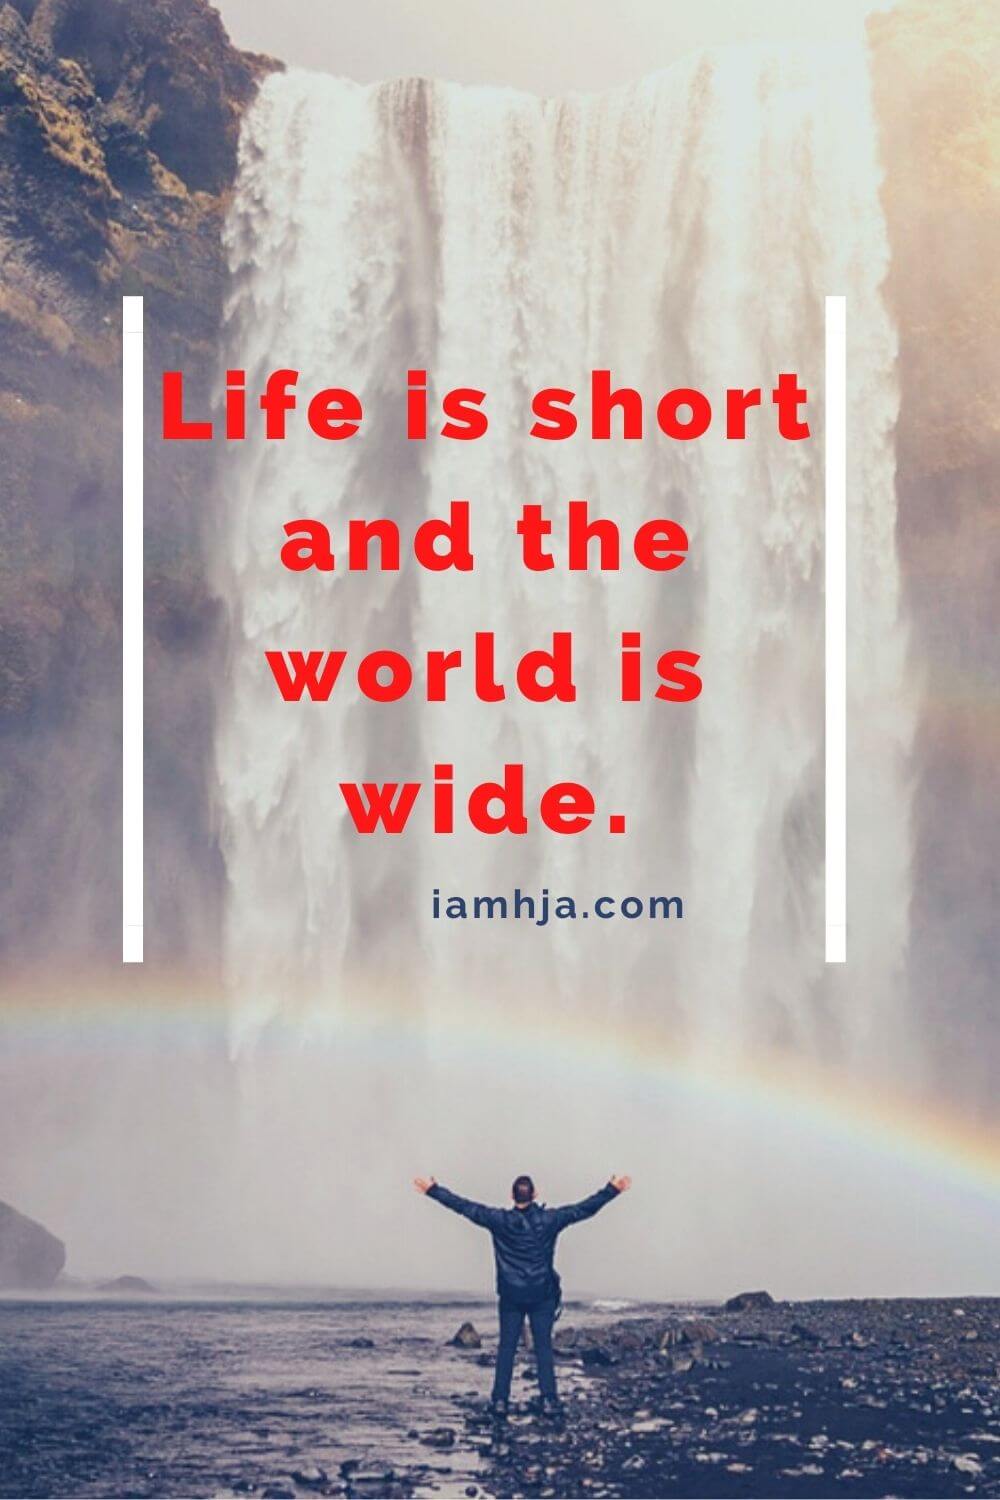 Life is short and the world is wide.